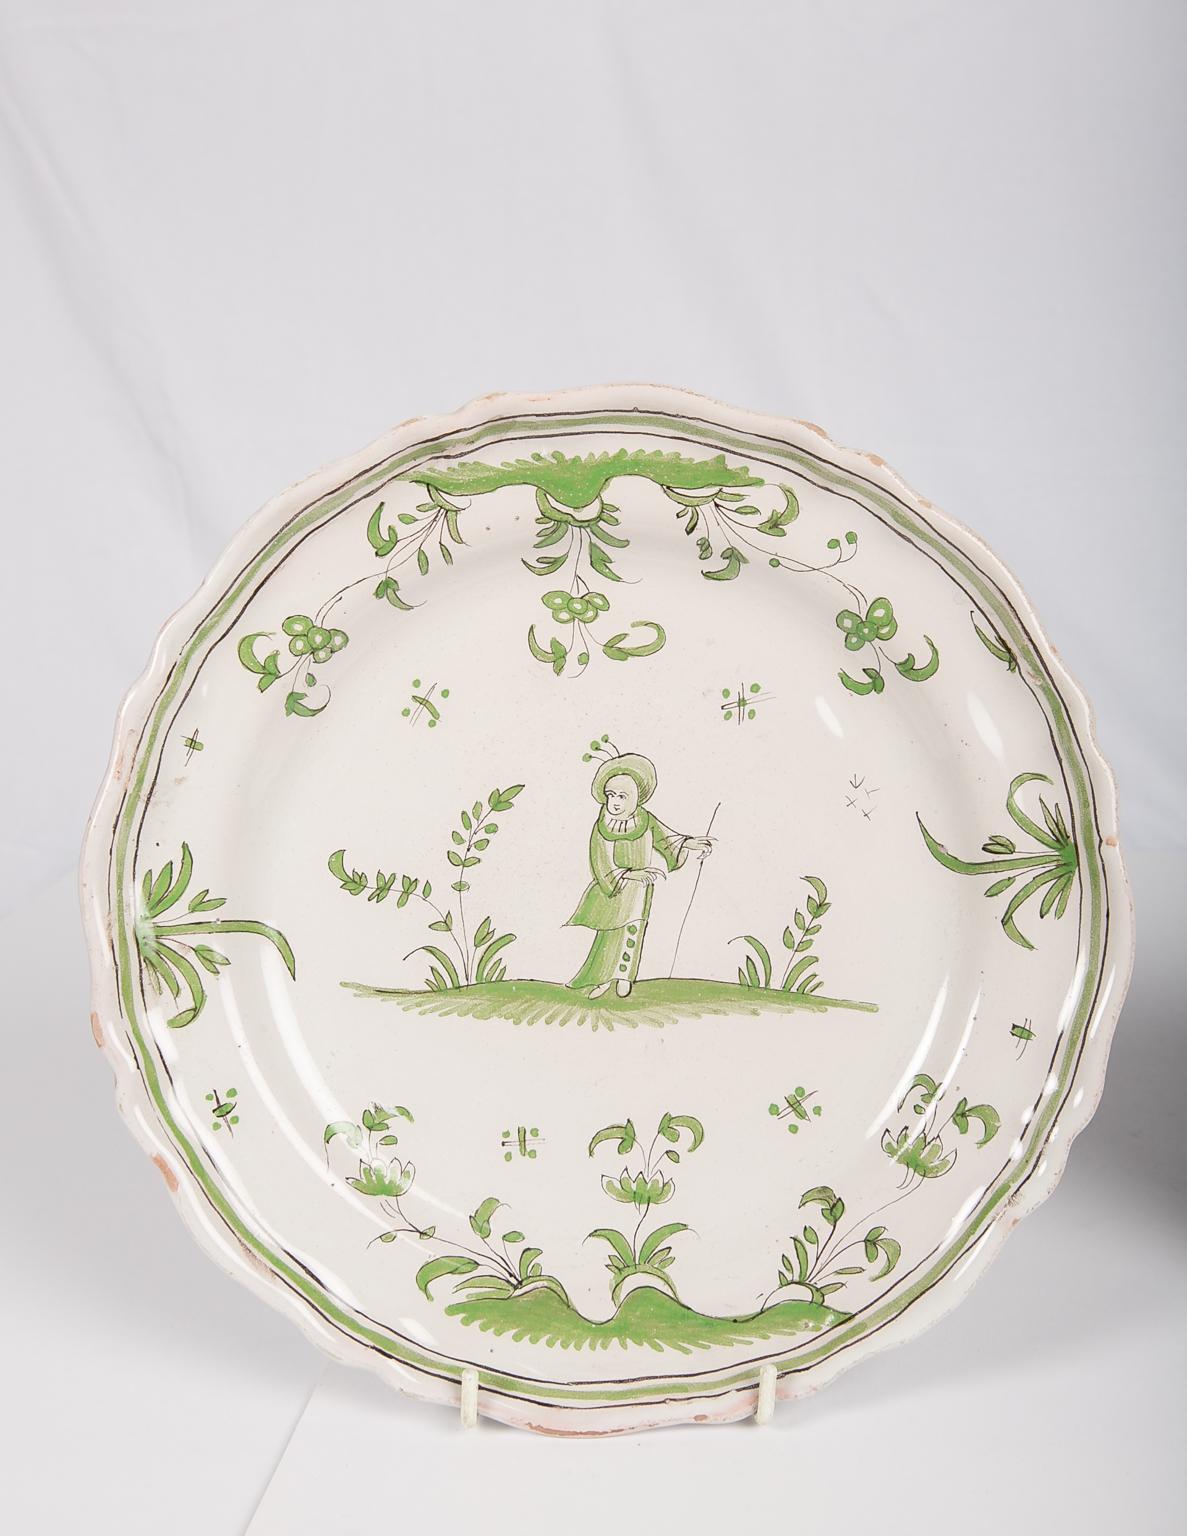 French Faience Dishes or Plates Made circa 1780 In Excellent Condition For Sale In Katonah, NY